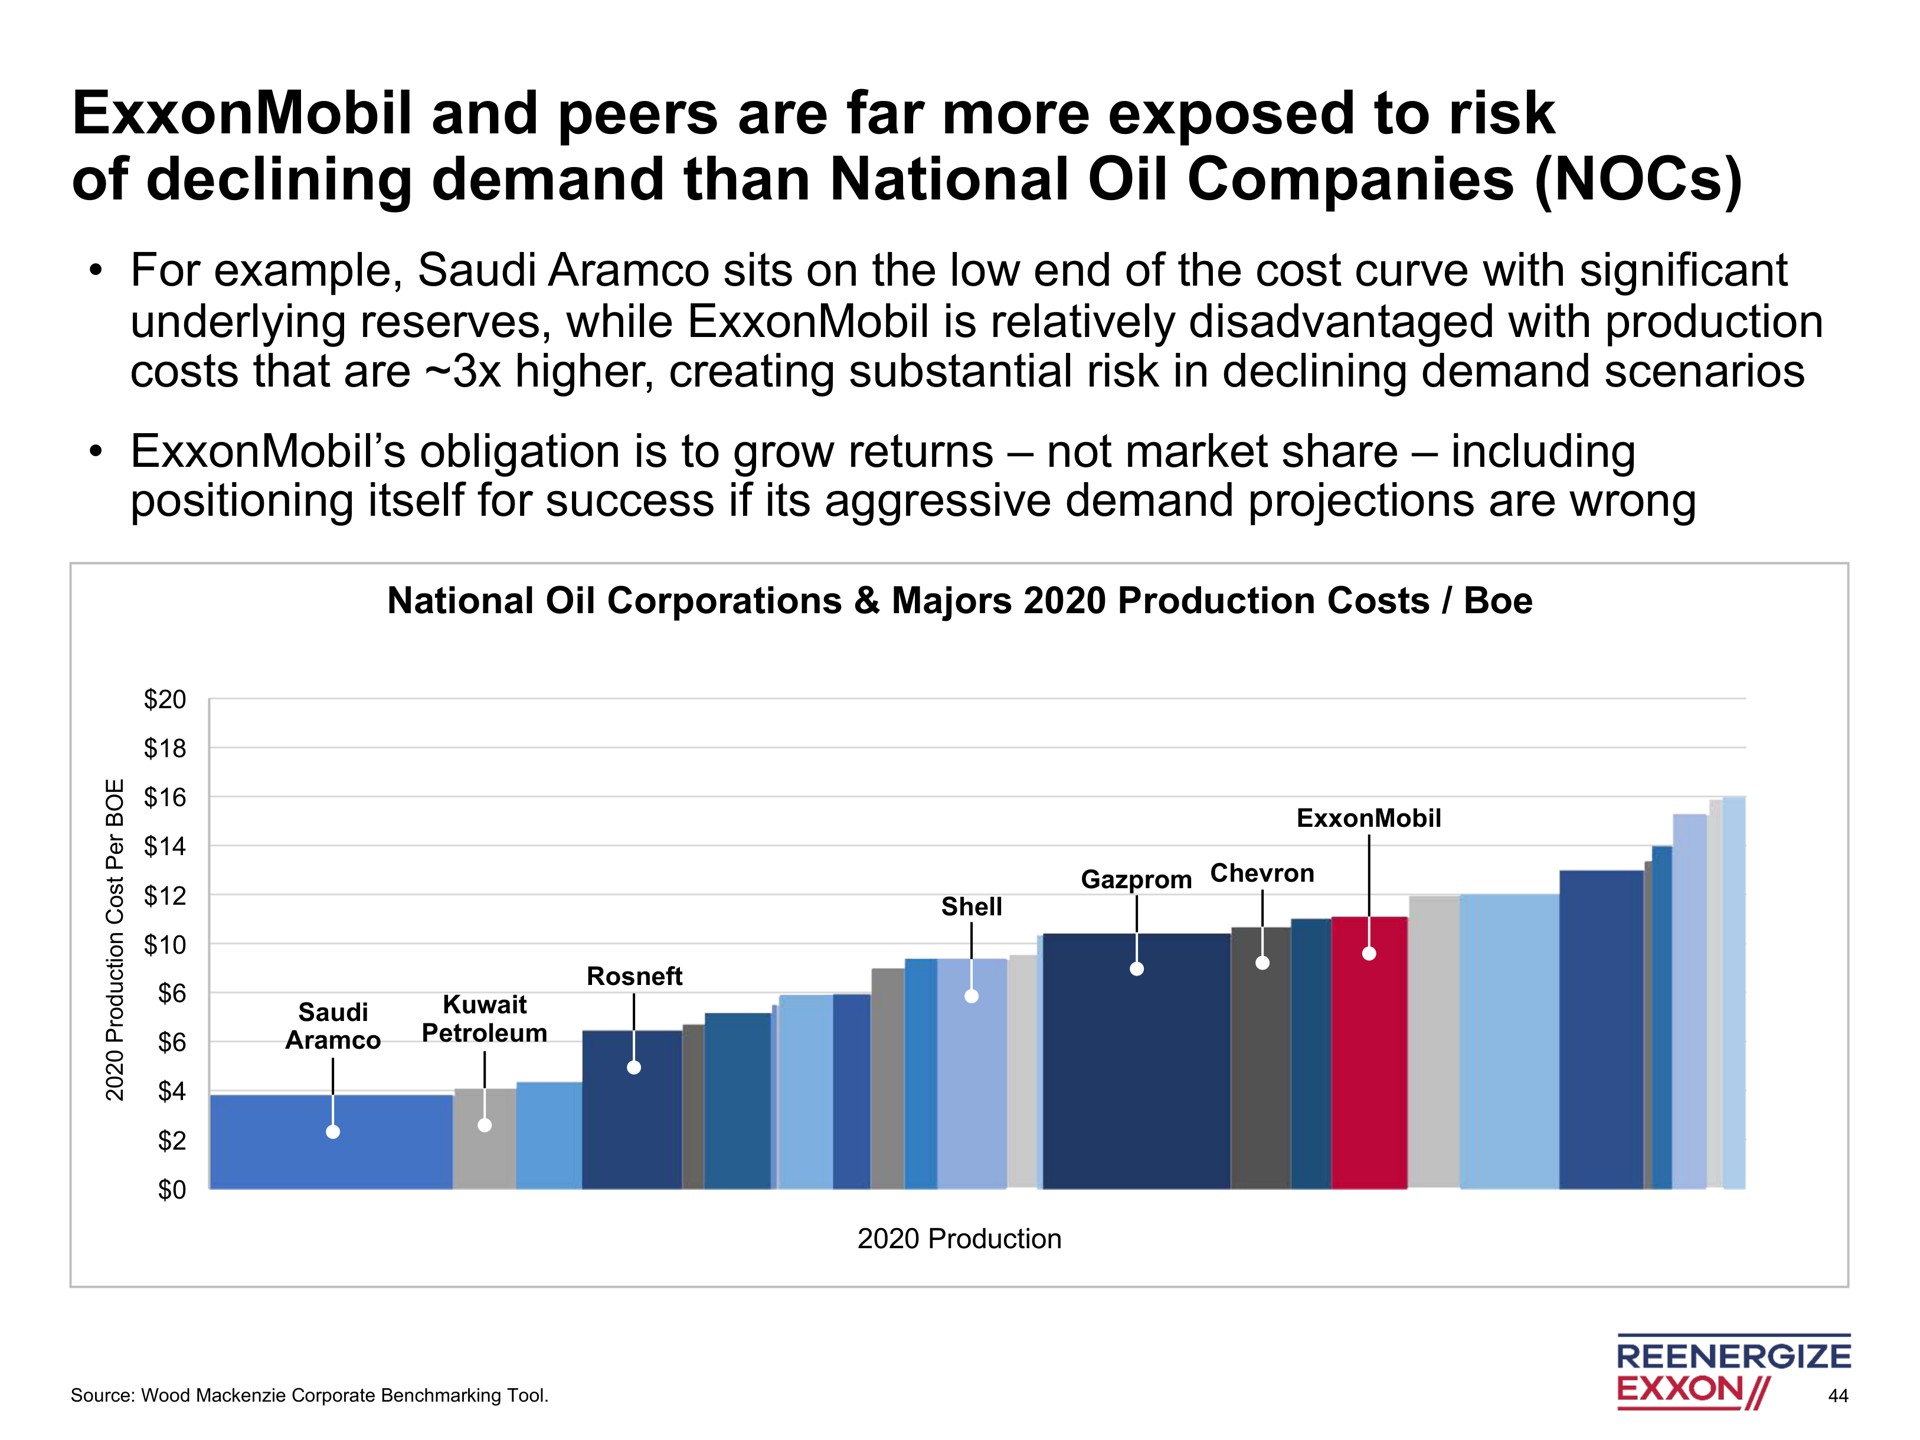 and peers are far more exposed to risk of declining demand than national oil companies | Engine No. 1